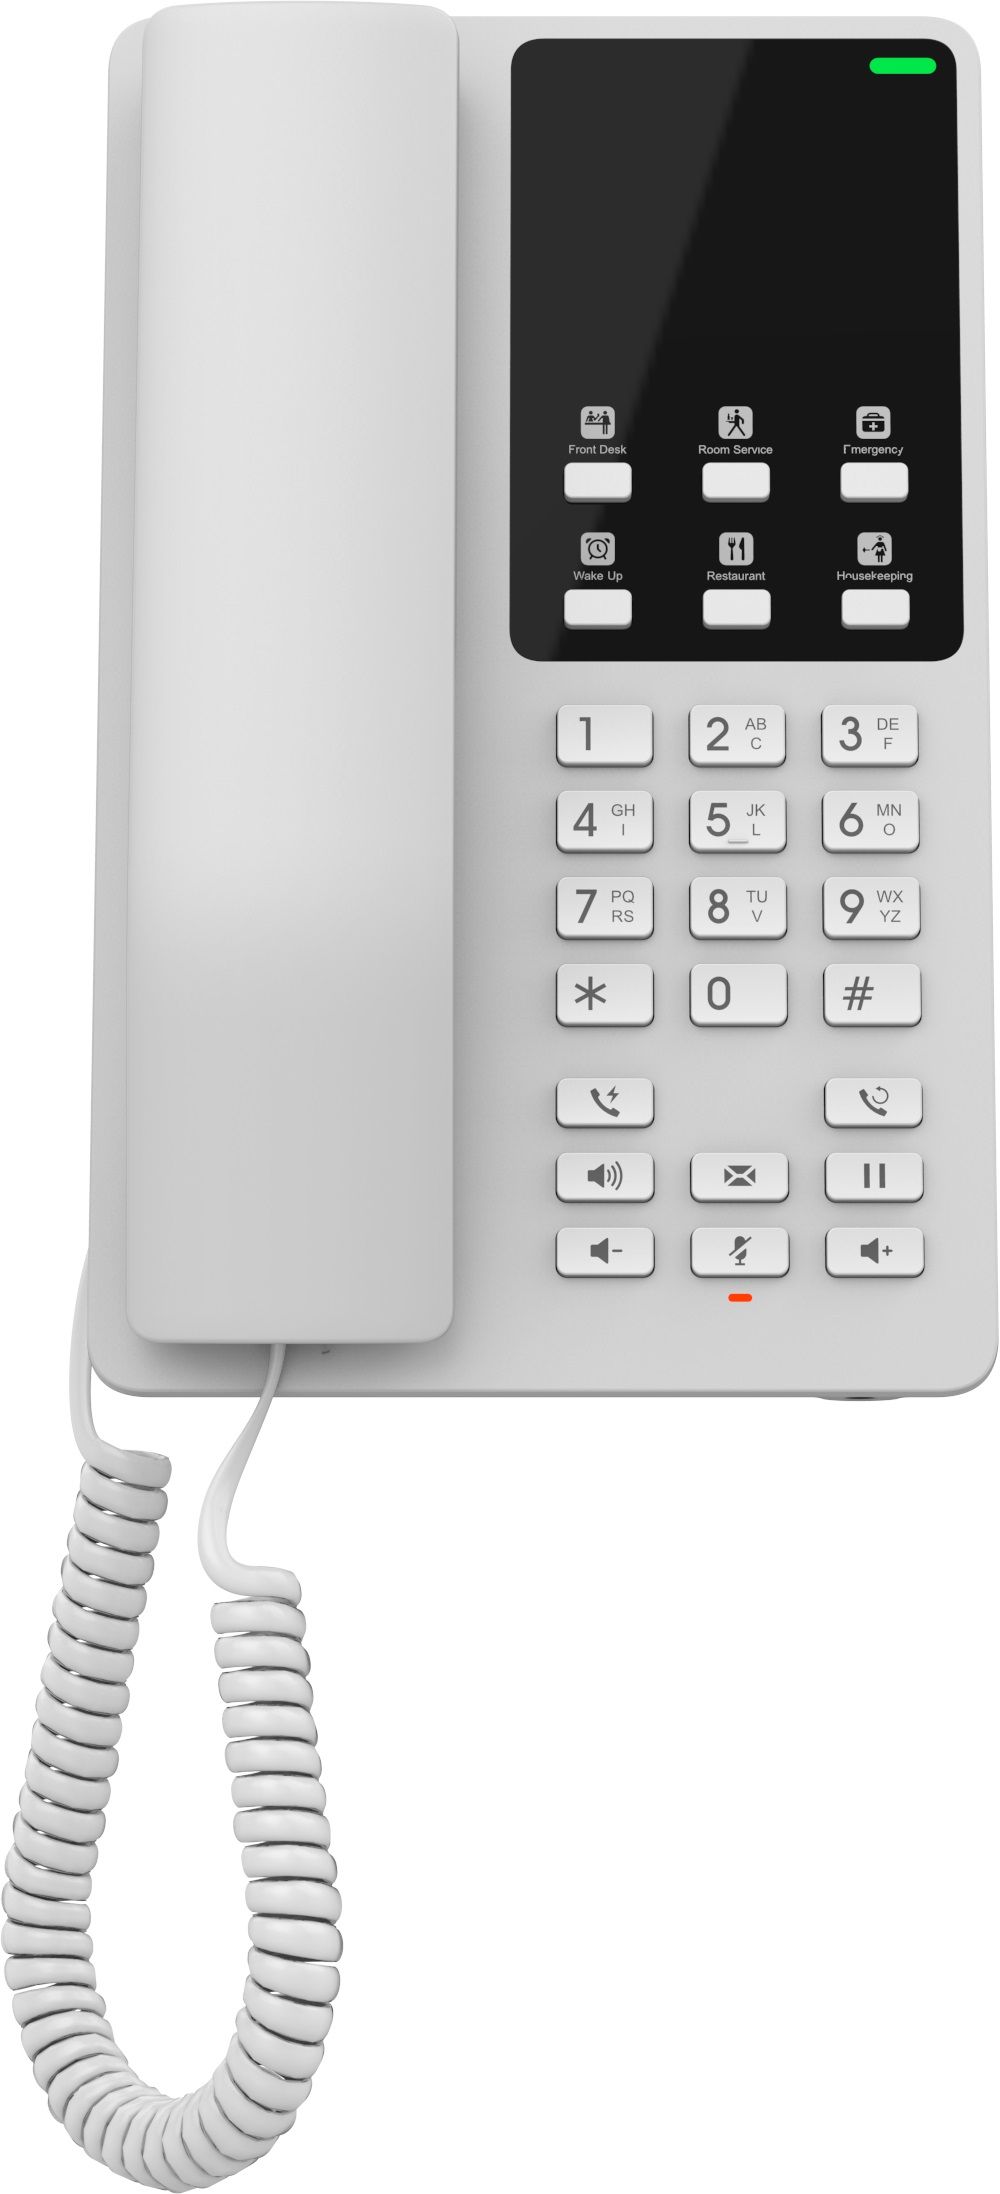 Grandstream GHP620W Hotel Phone with Built-in WiFi - White photo